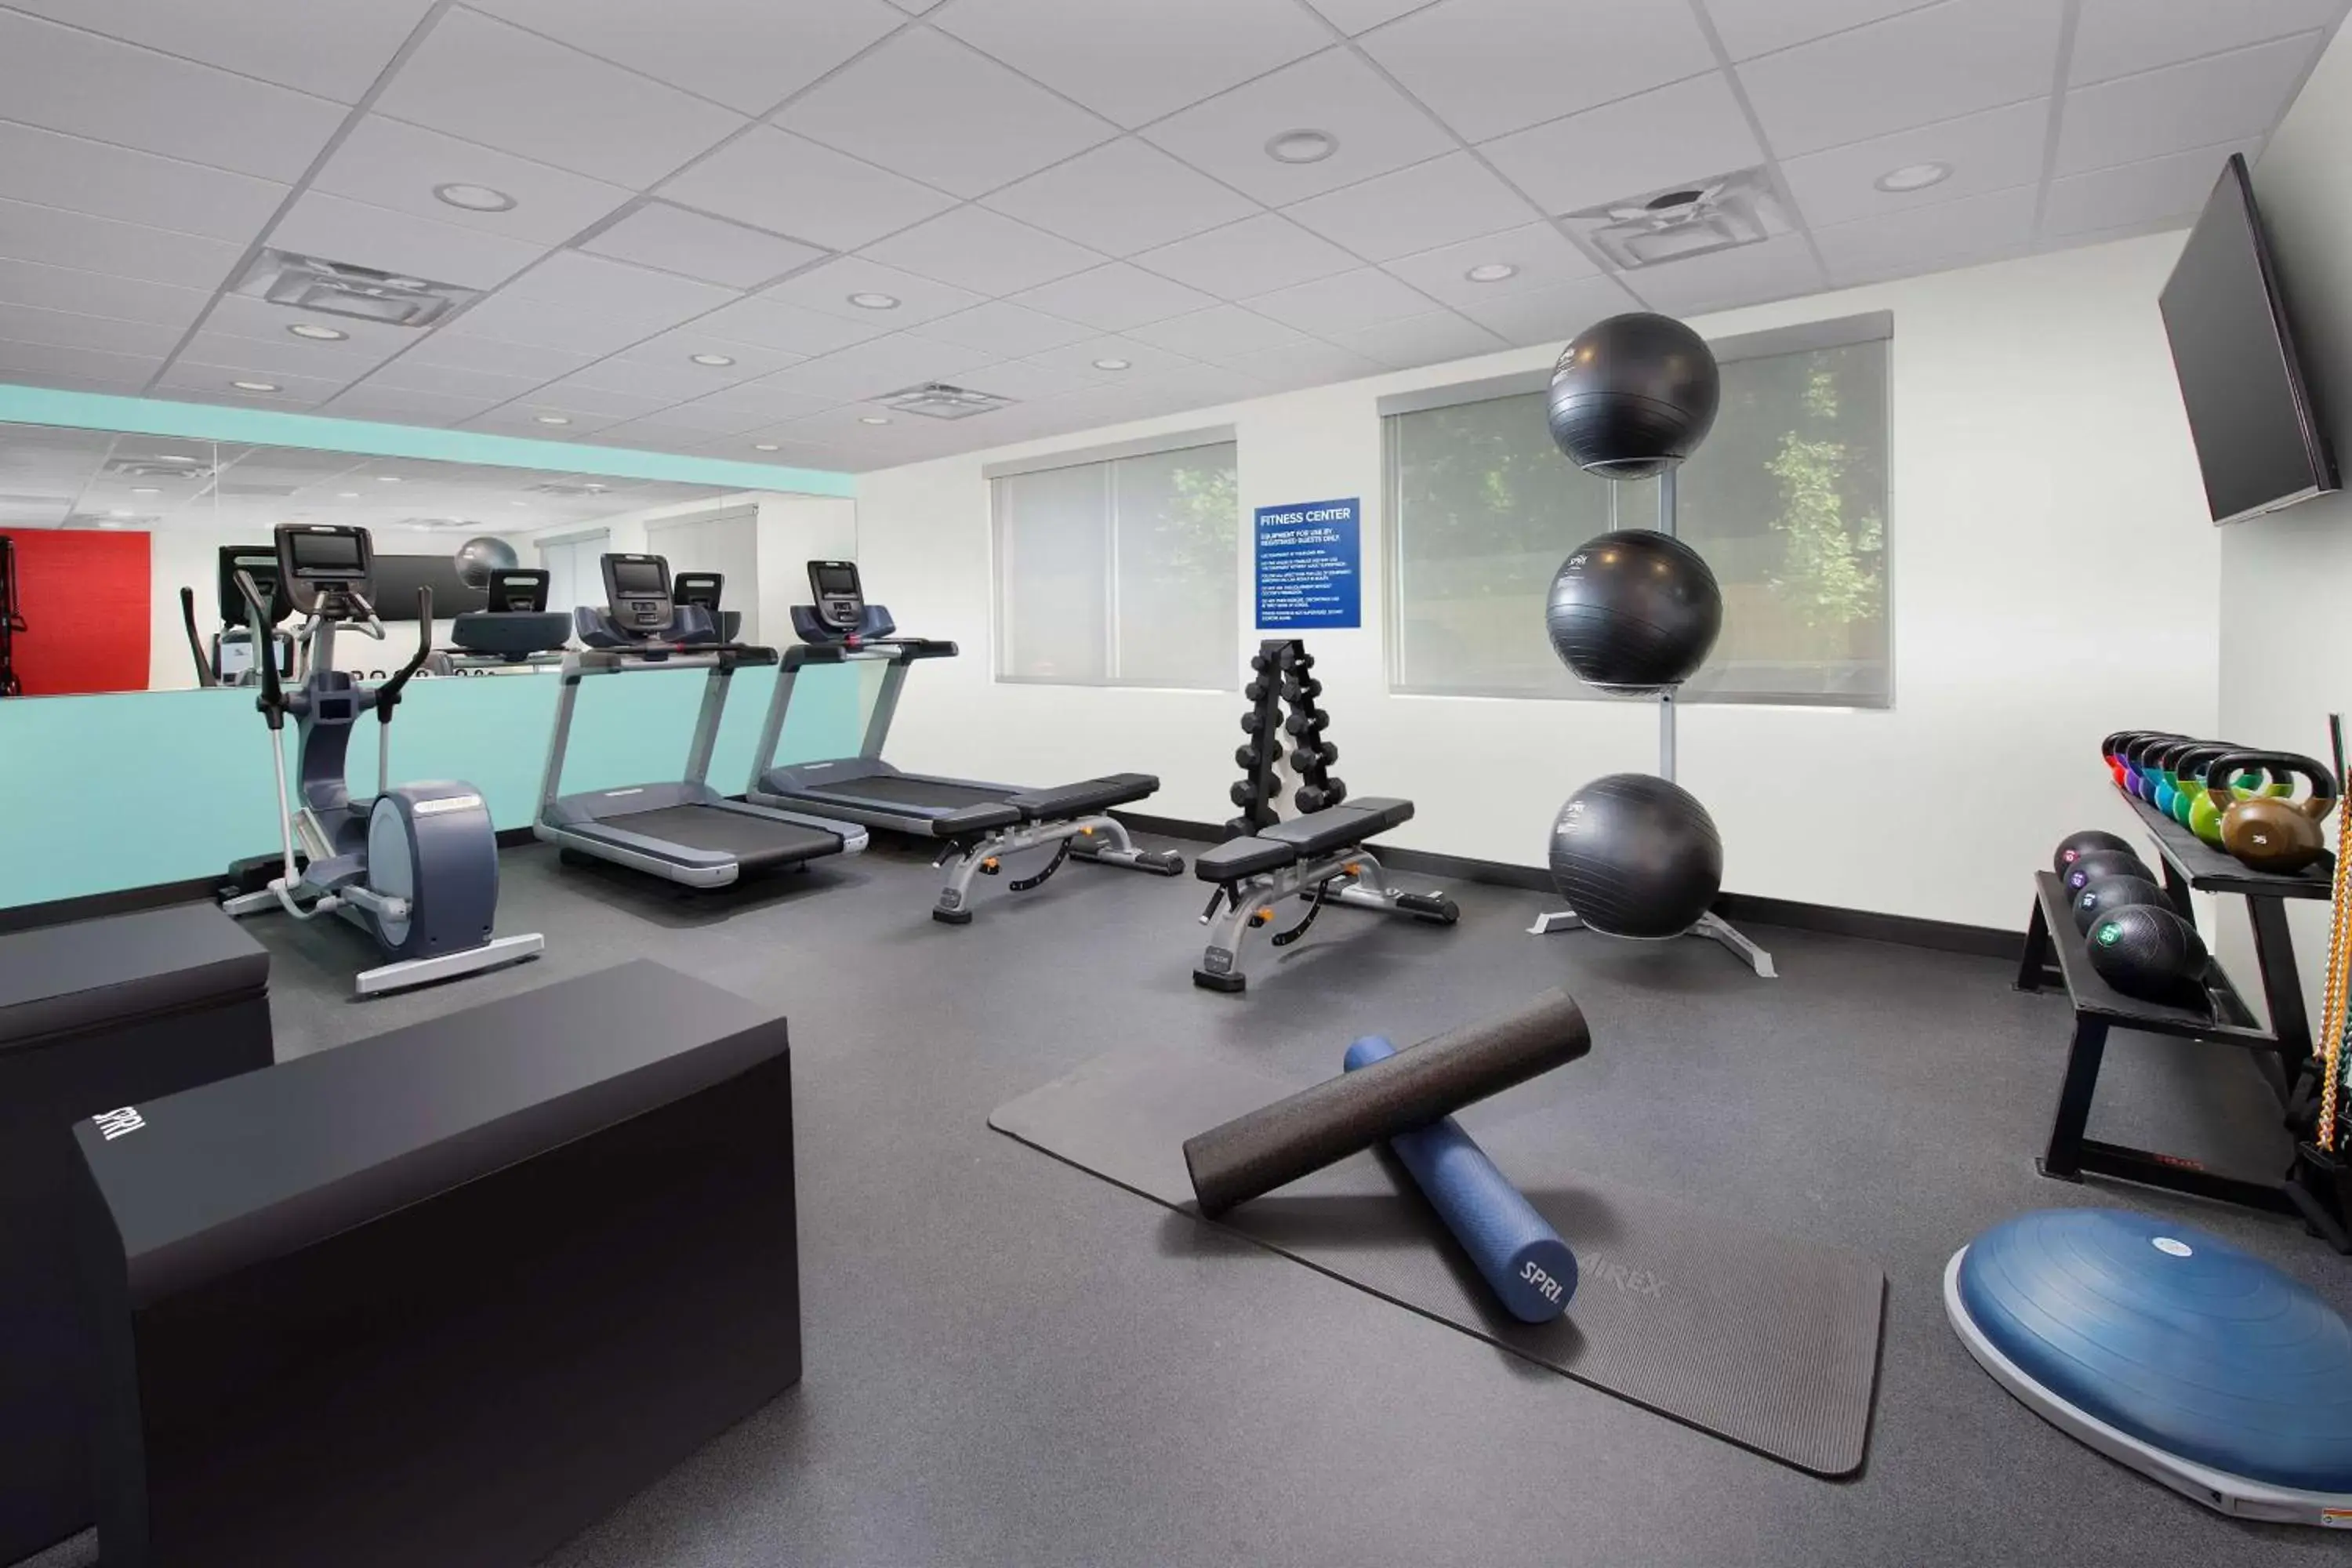 Fitness centre/facilities, Fitness Center/Facilities in Tru By Hilton Tallahassee Central